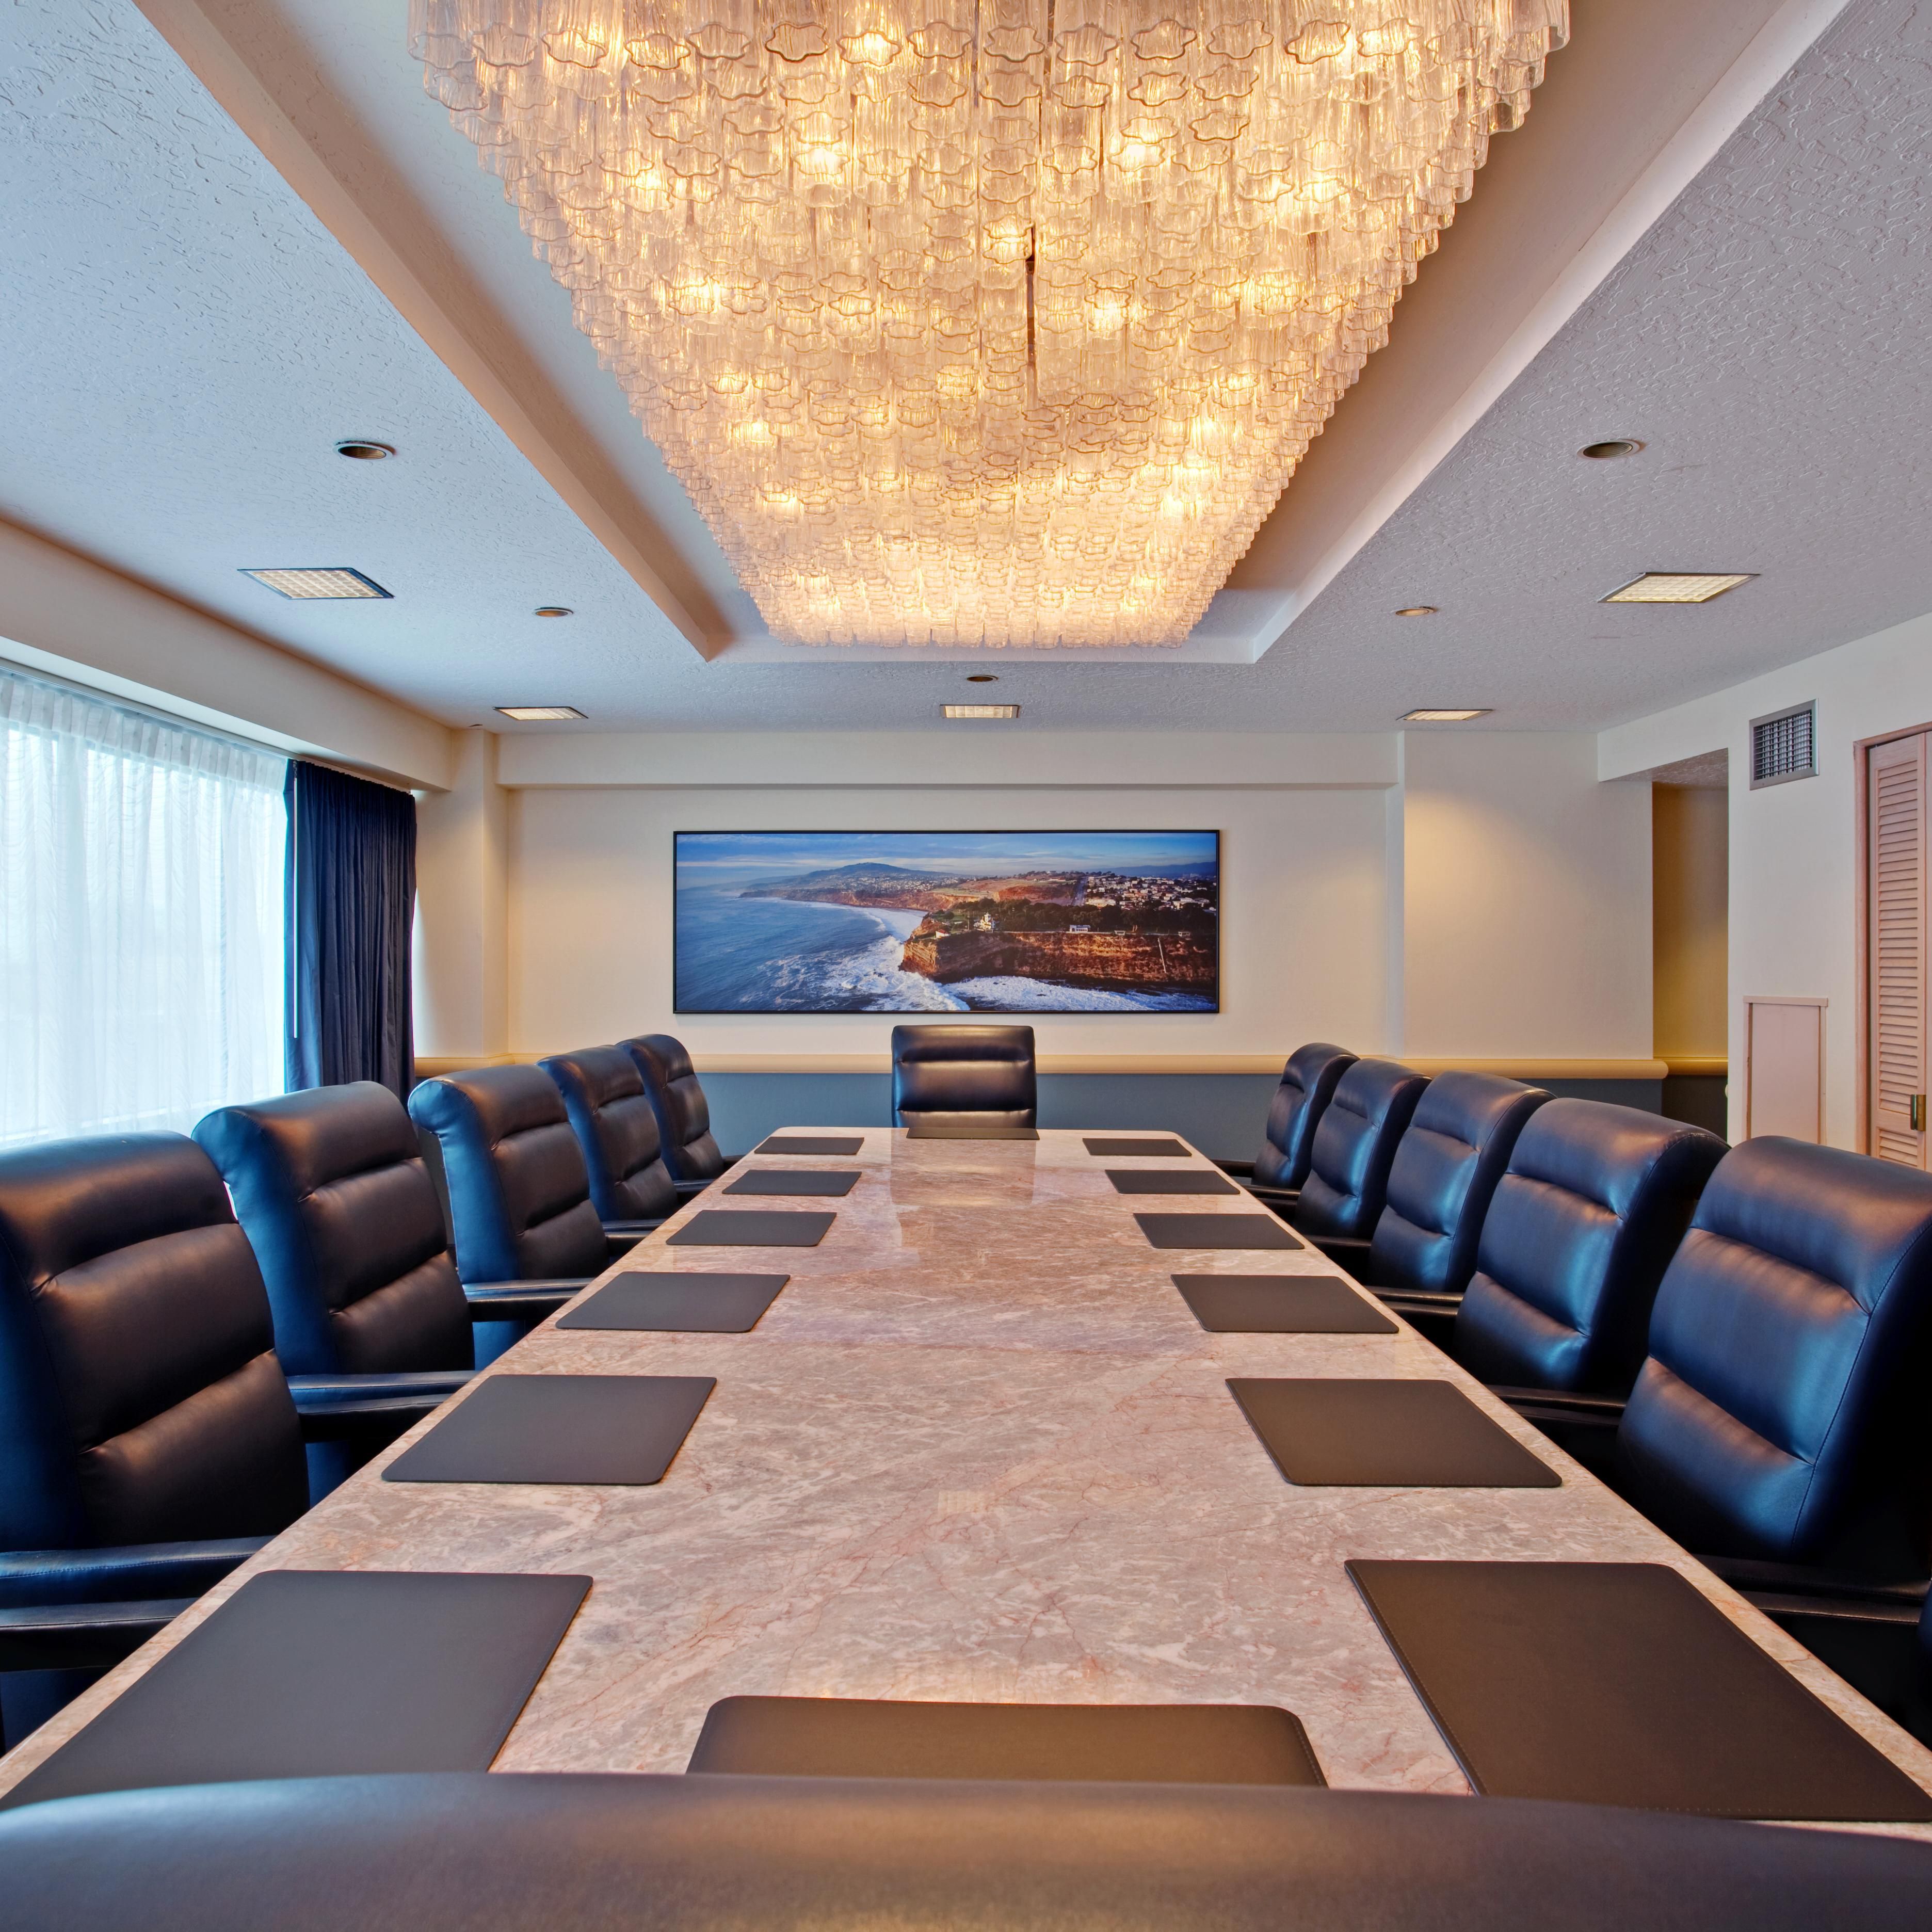 Liven up your Meeting with Windows and Natural Lighting